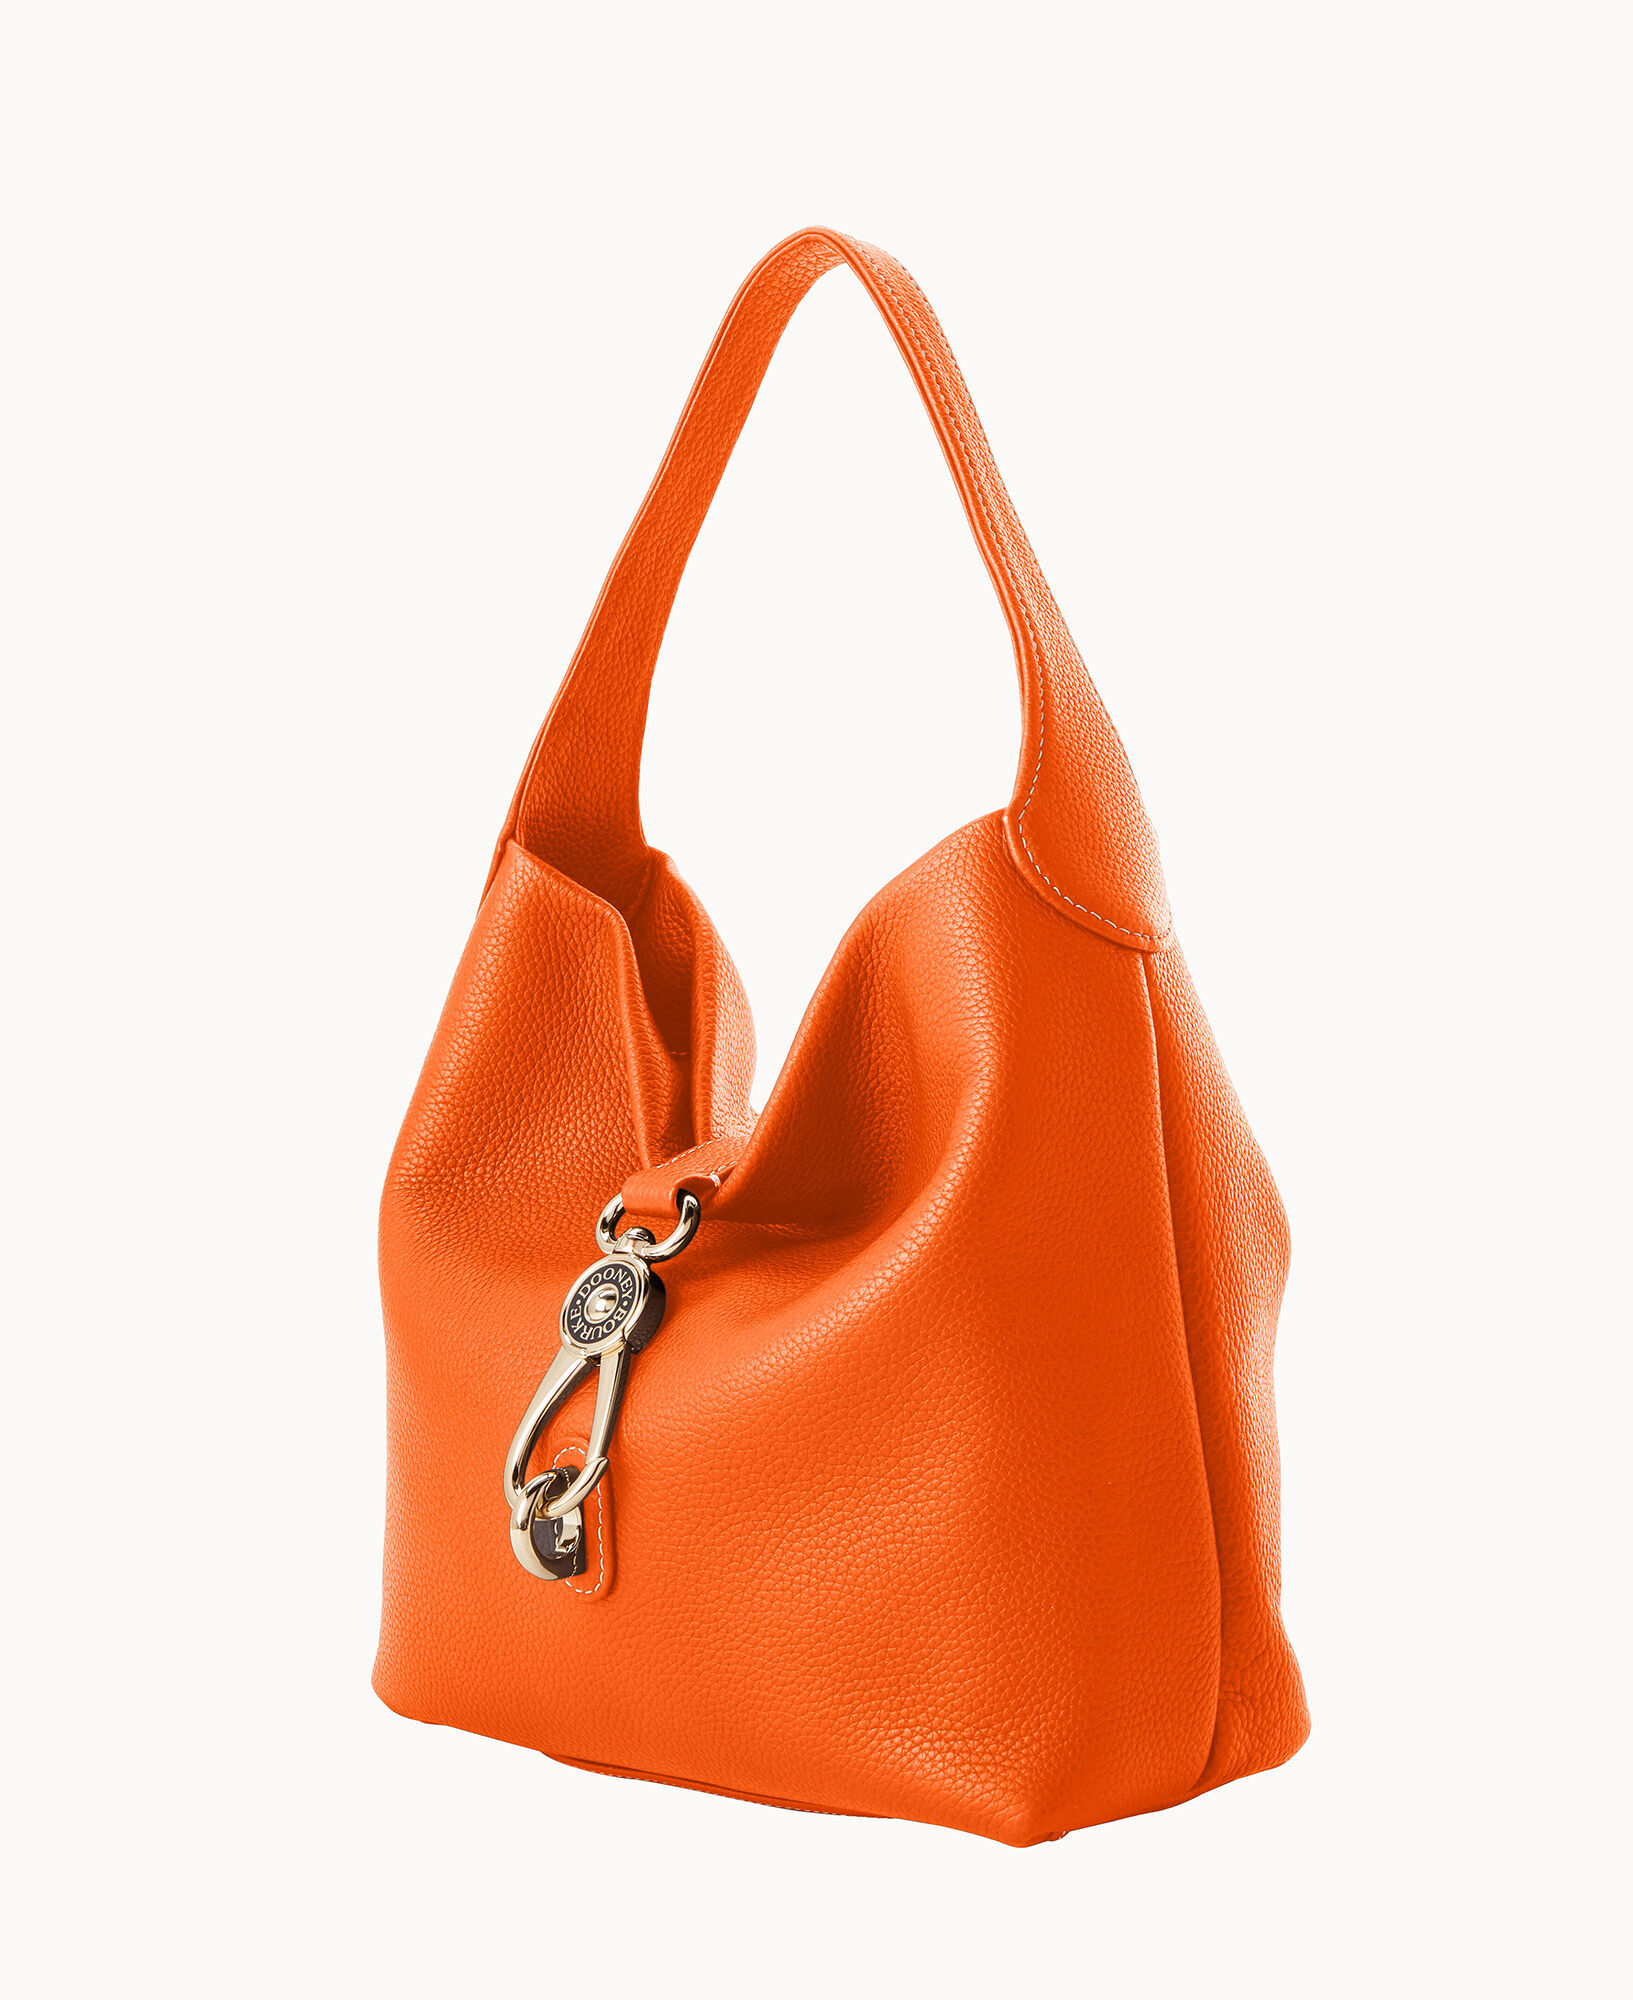 Hermes classic orange retired??! Is that possible?